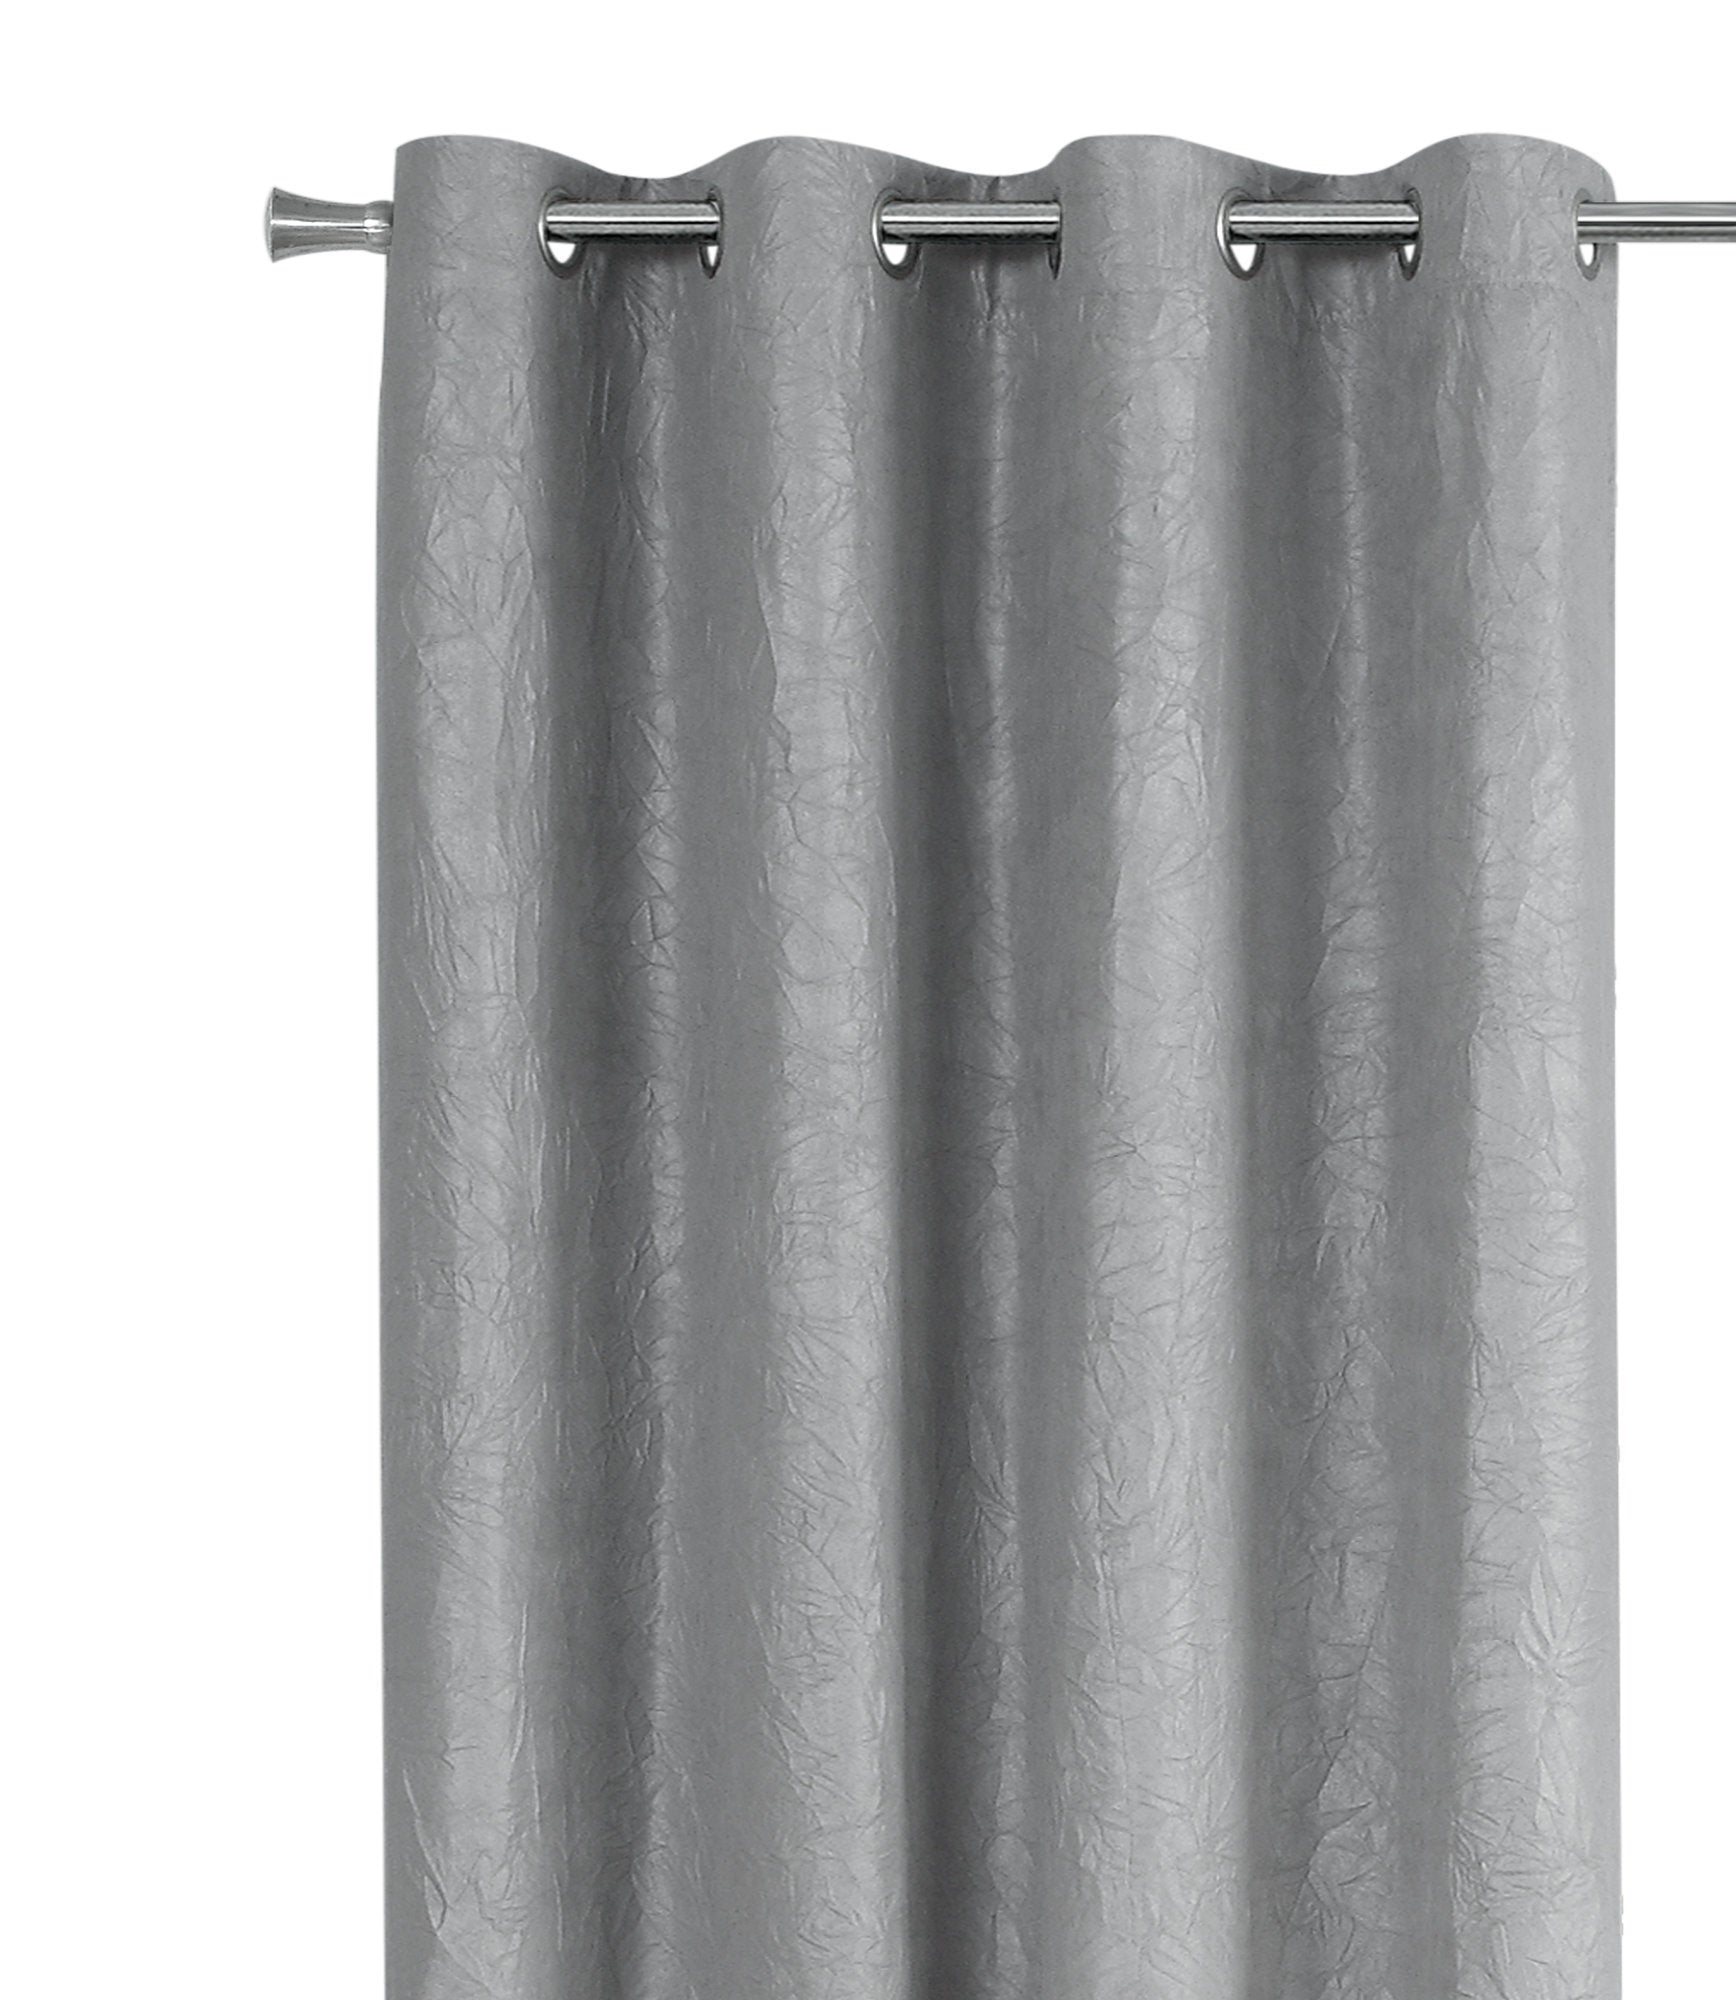 MN-879845    Curtain Panel, 2Pcs Set, 54"W X 95"L, Room Darkening, Grommet, Living Room, Bedroom, Kitchen, Micro Suede, Wrinkled  Finish, Polyester Room Darkening Fabric, Silver, Contemporary, Modern